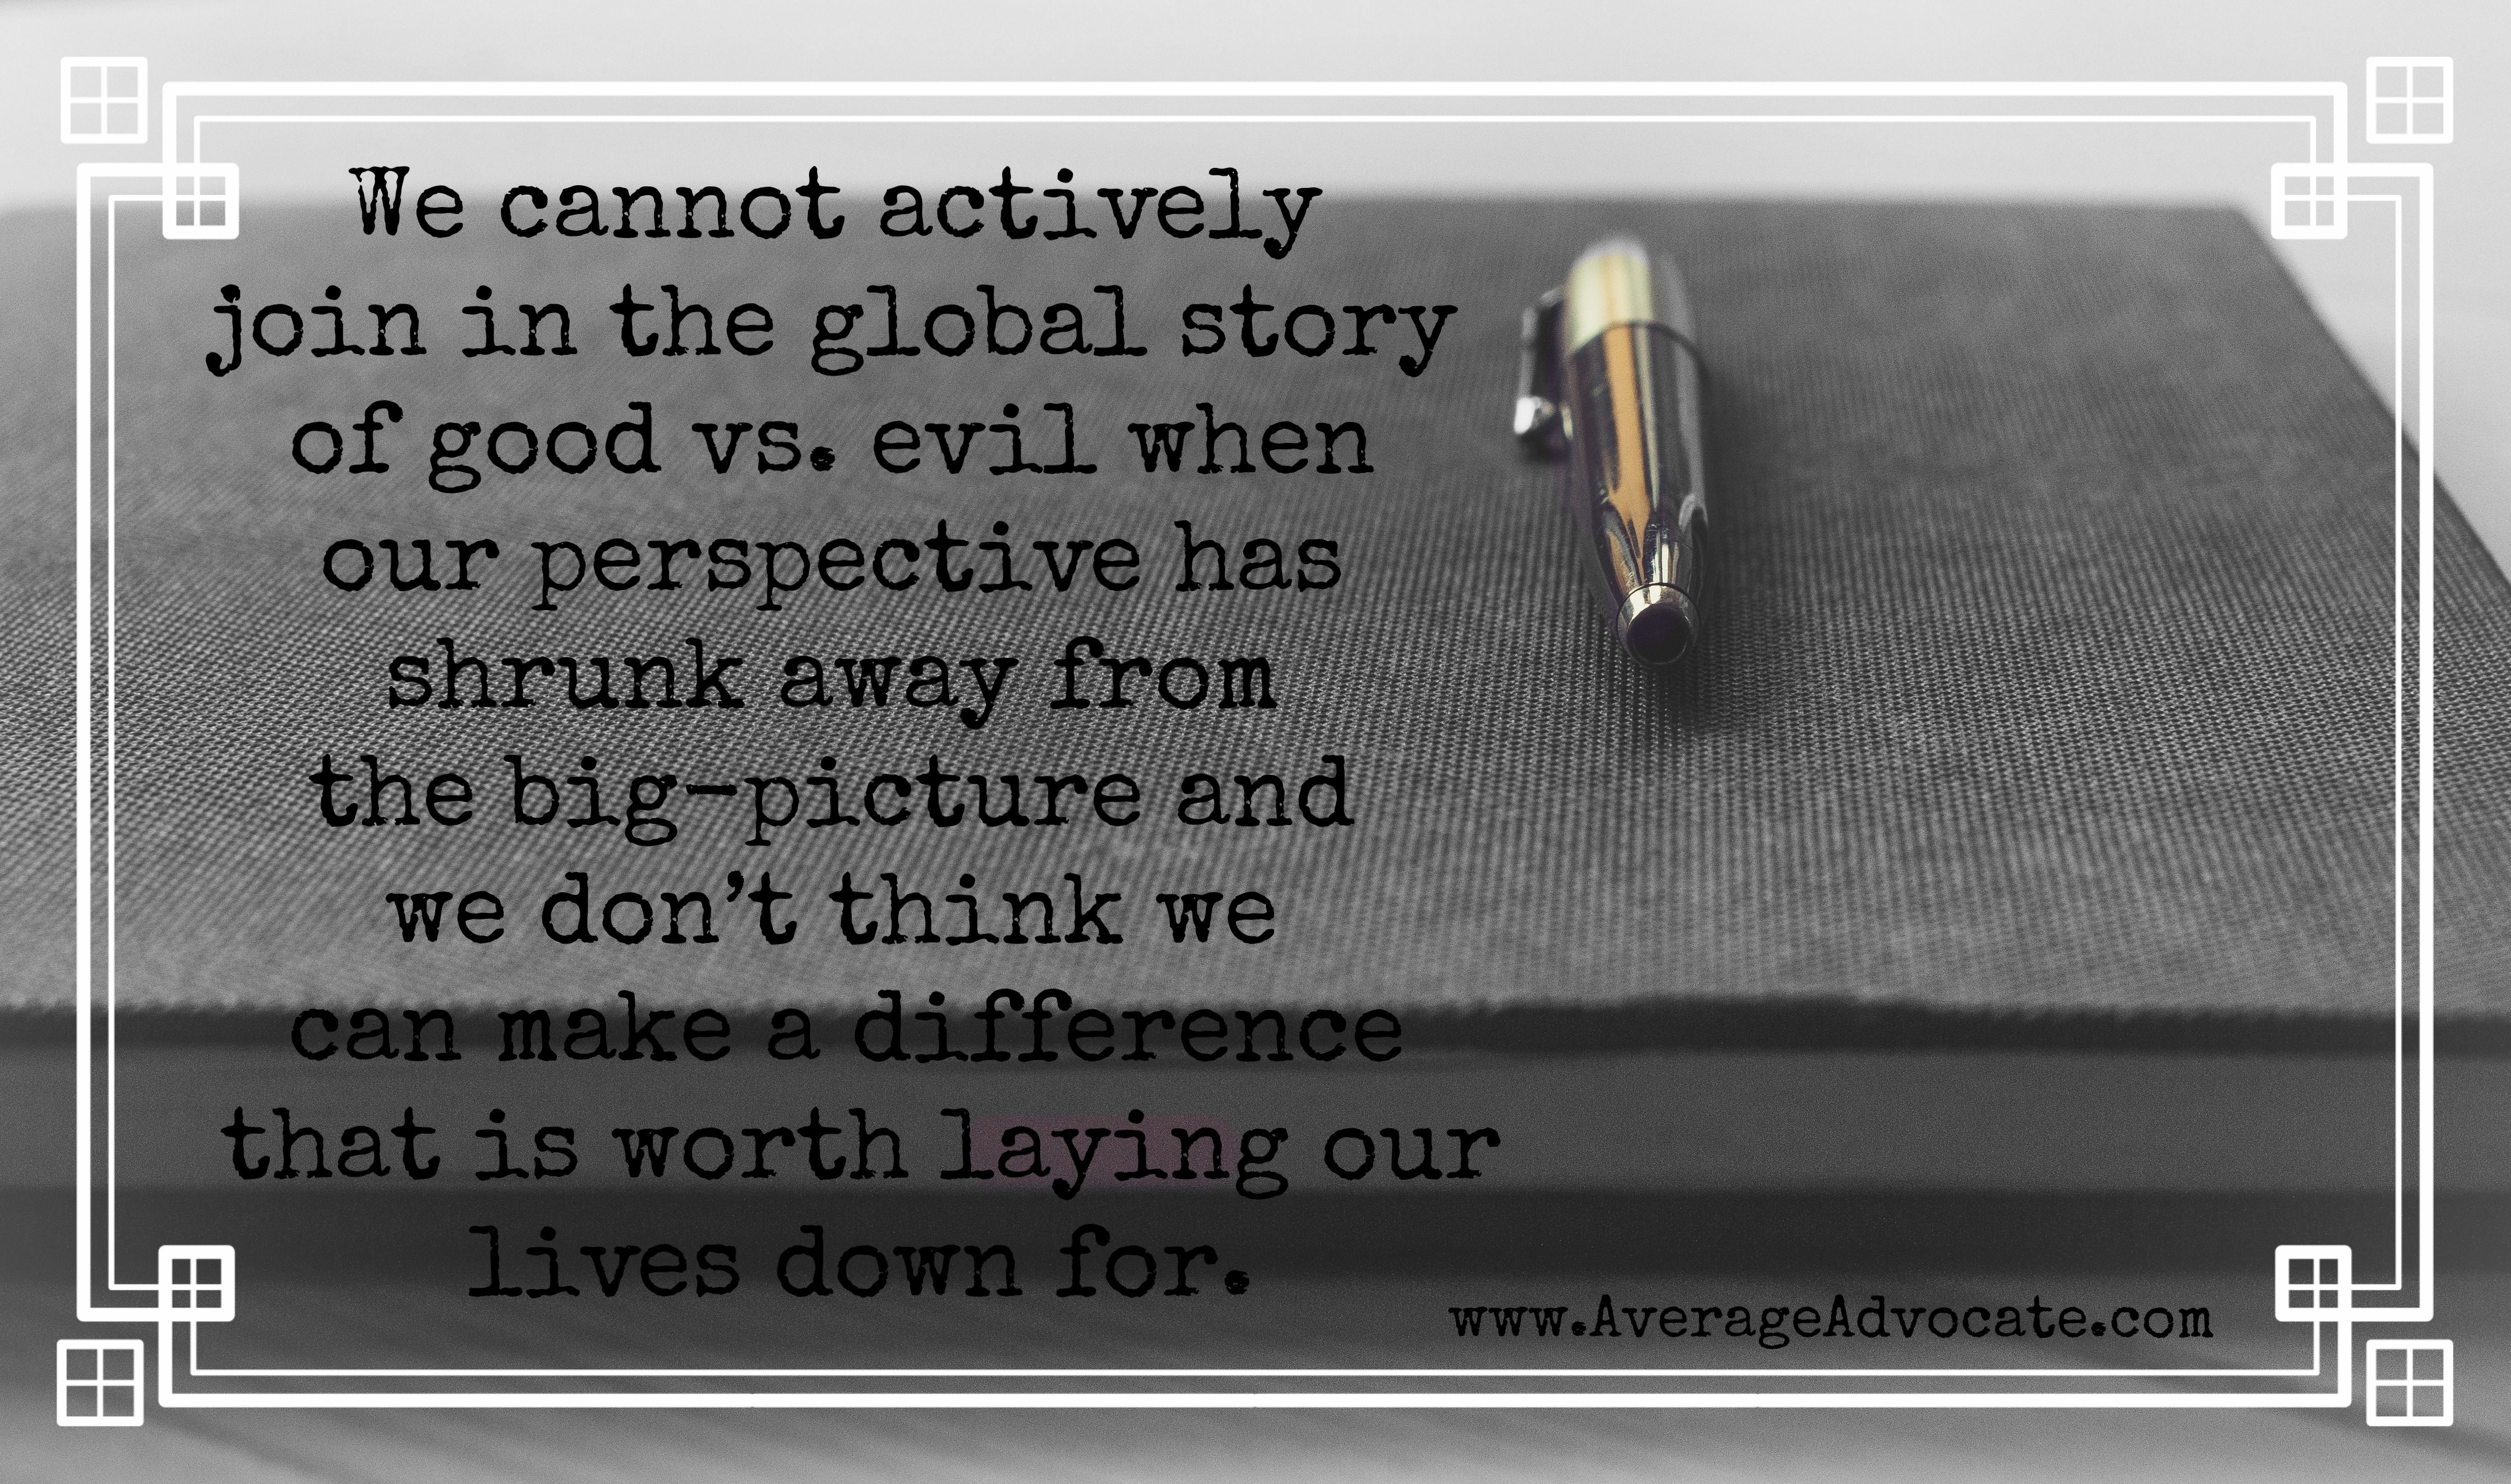 Make a Difference in the Good vs. Evil story www.AverageAdvocate.com